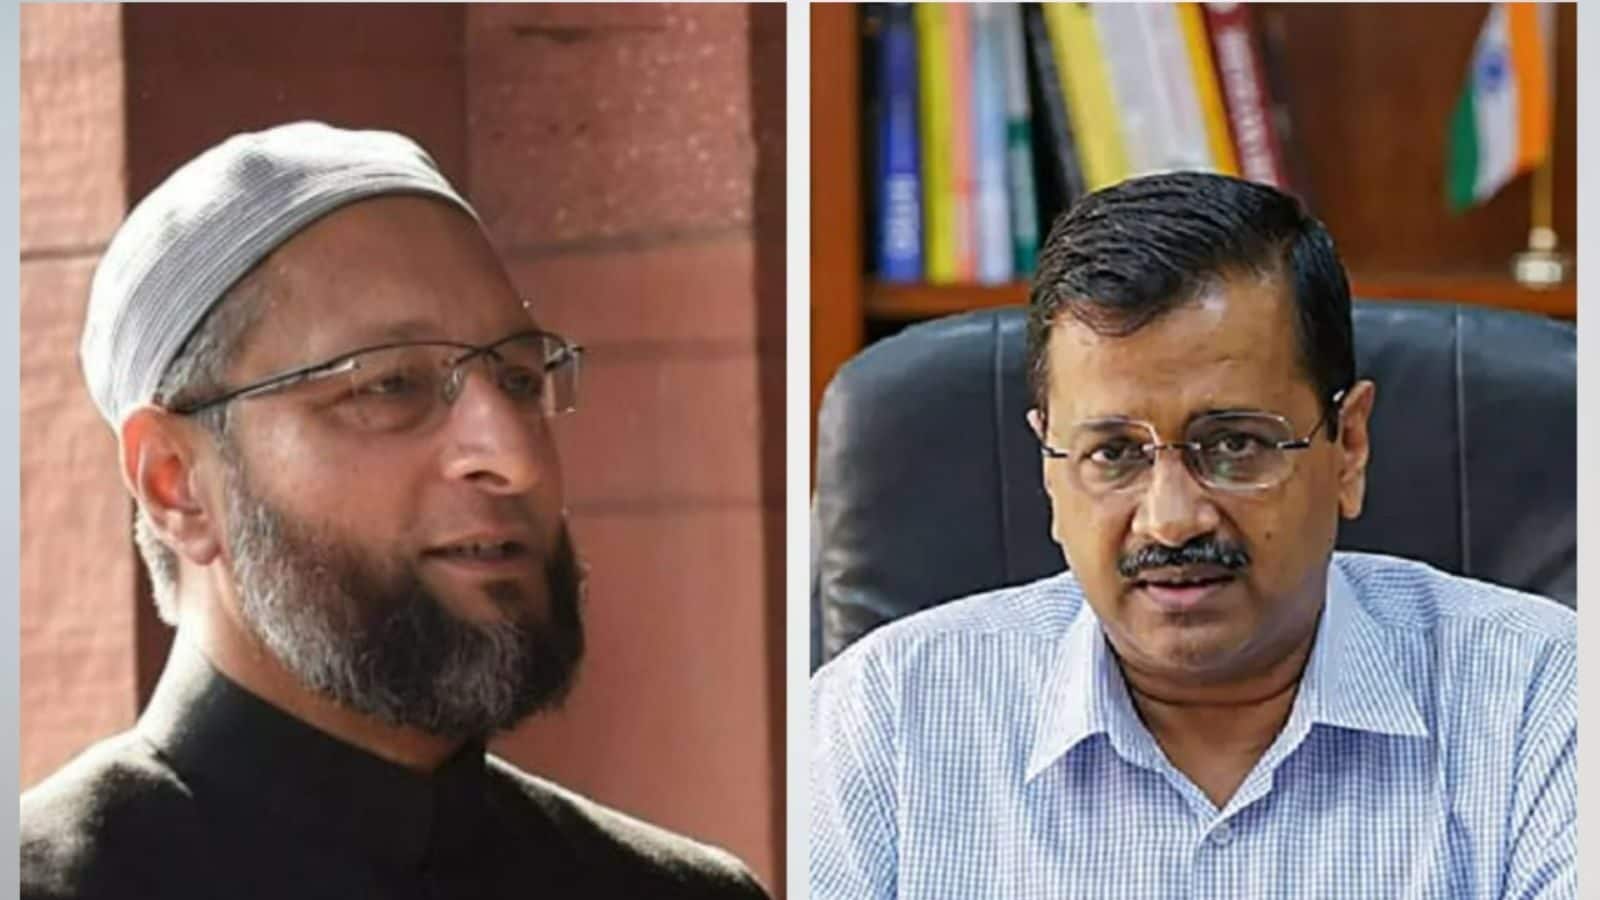 gujarat-govt-mulls-panel-on-uniform-civil-code-owaisi-says-it-s-only-to-get-votes-kejriwal-wants-ucc-but